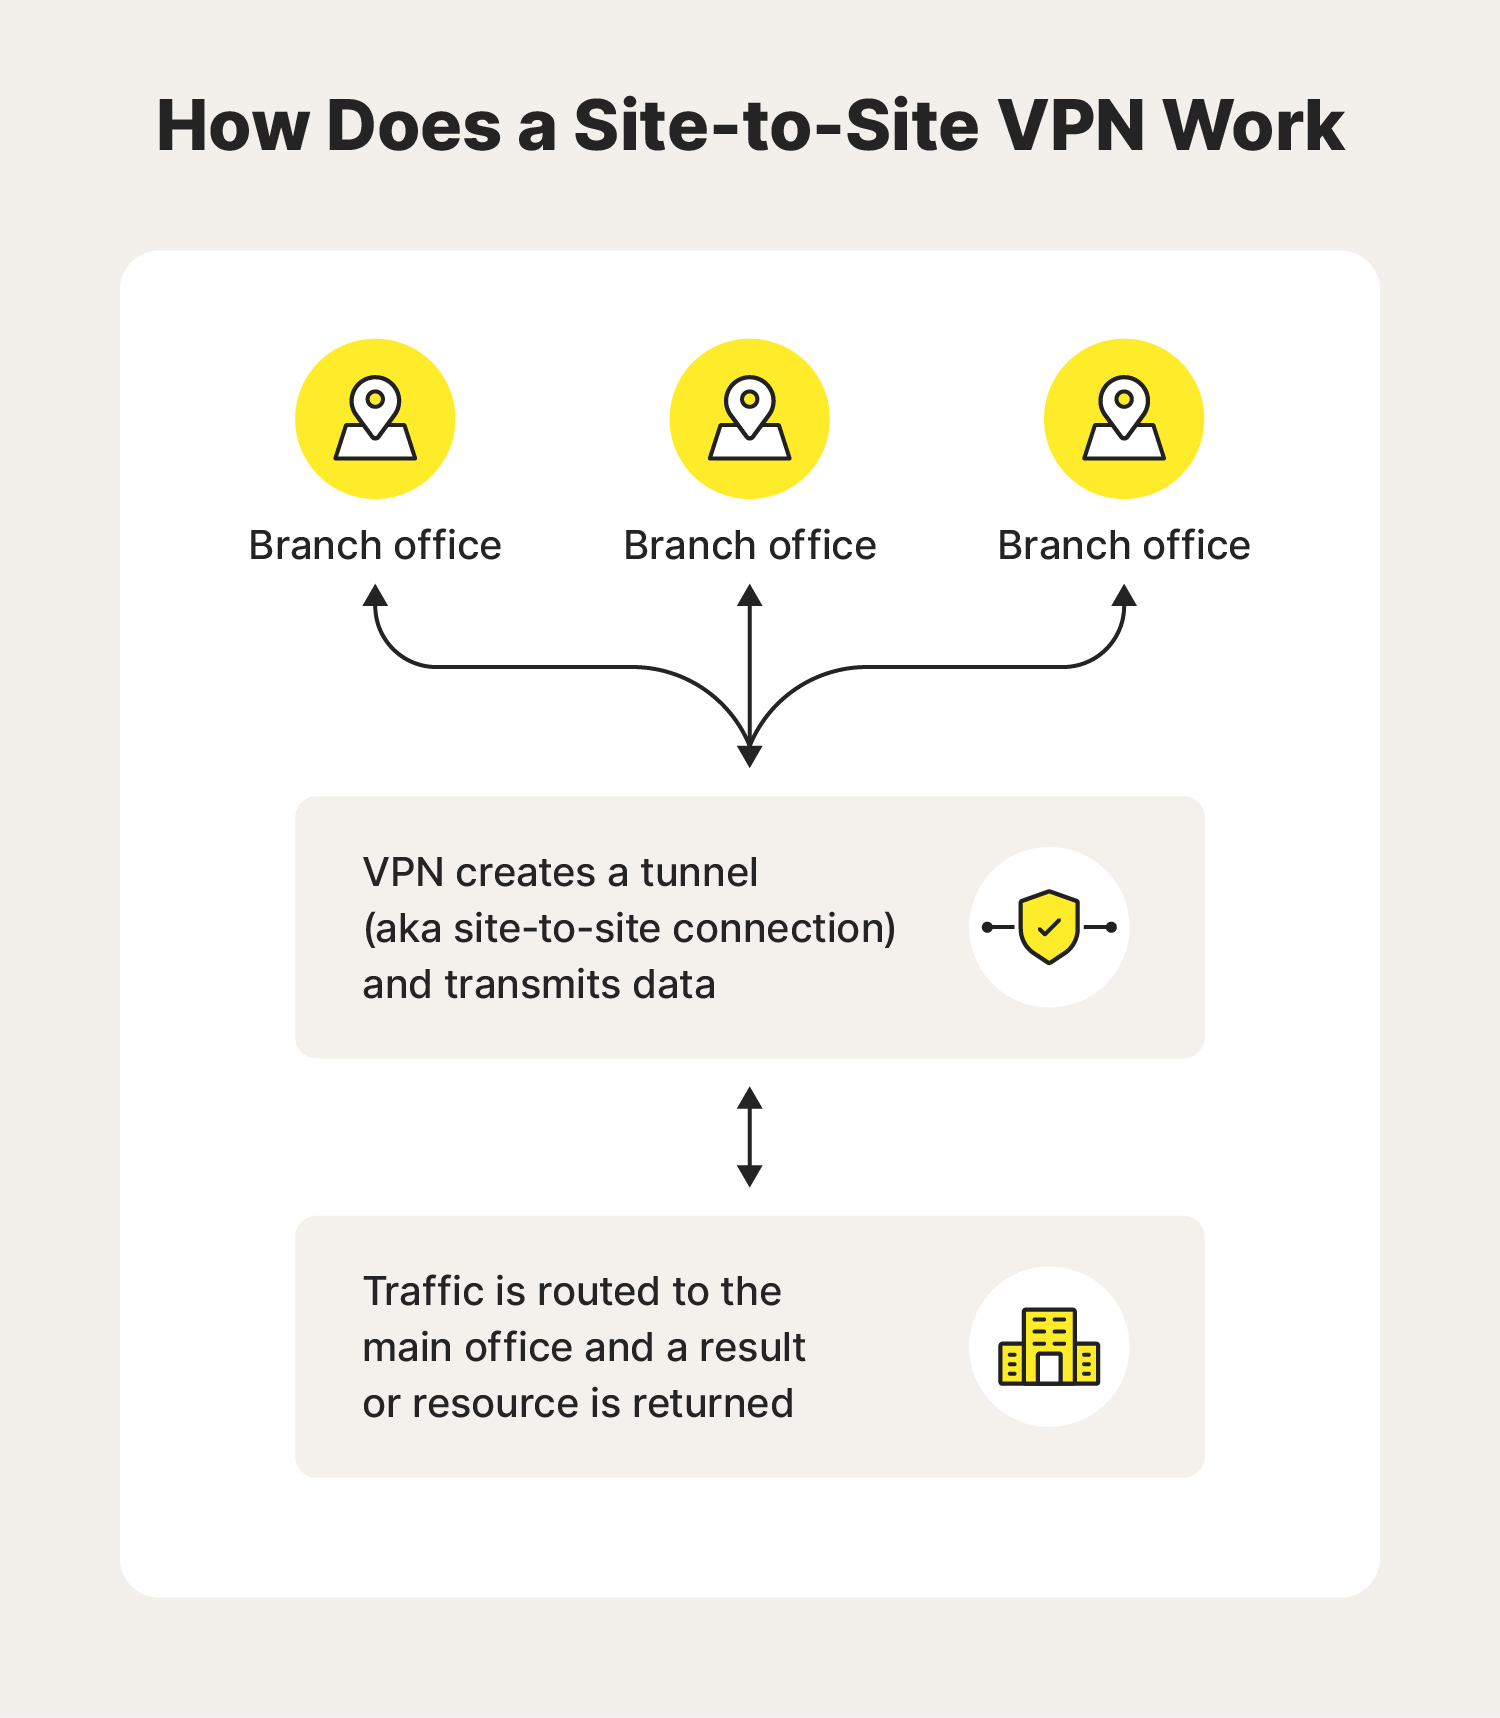 A diagram showing how a site-to-site VPN works.